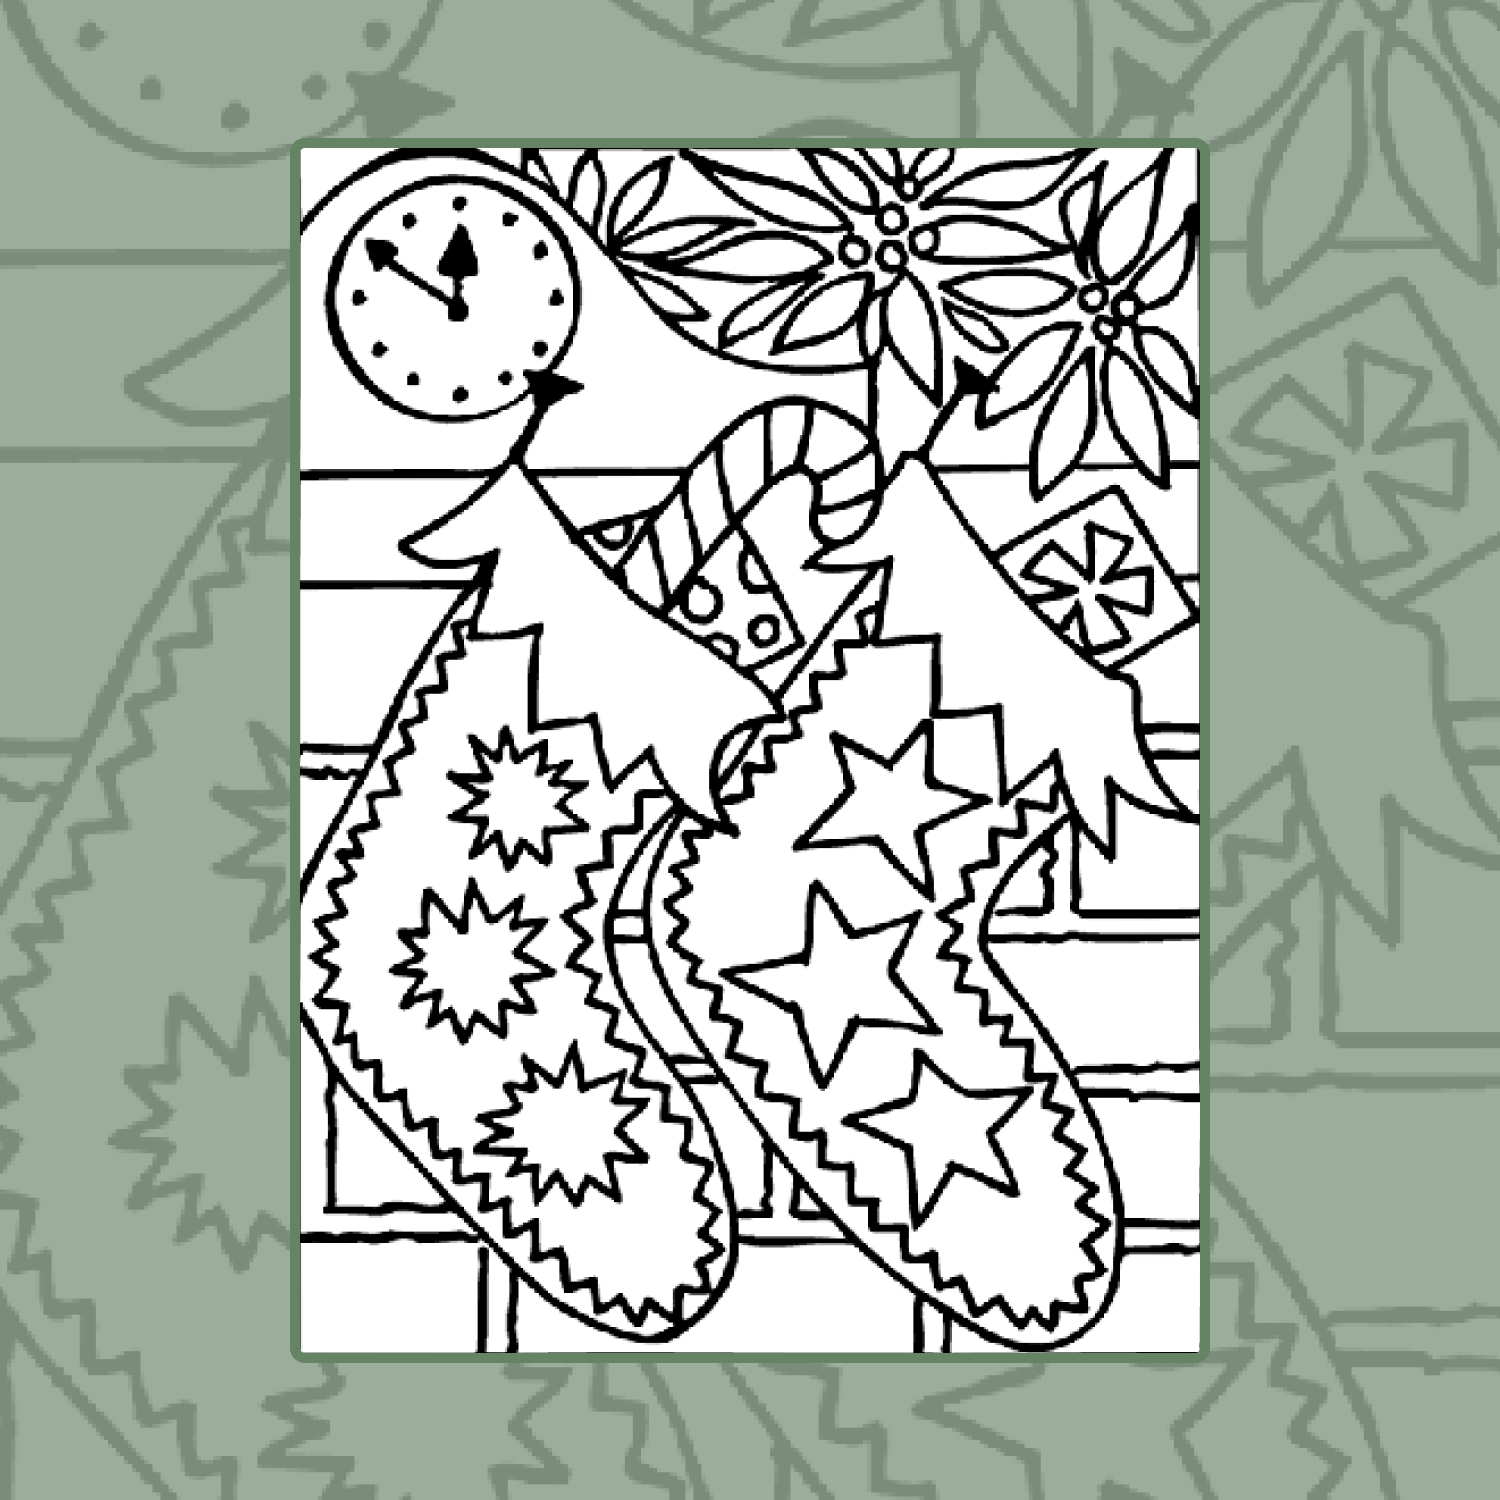 Christmas stockings coloring page cover image.